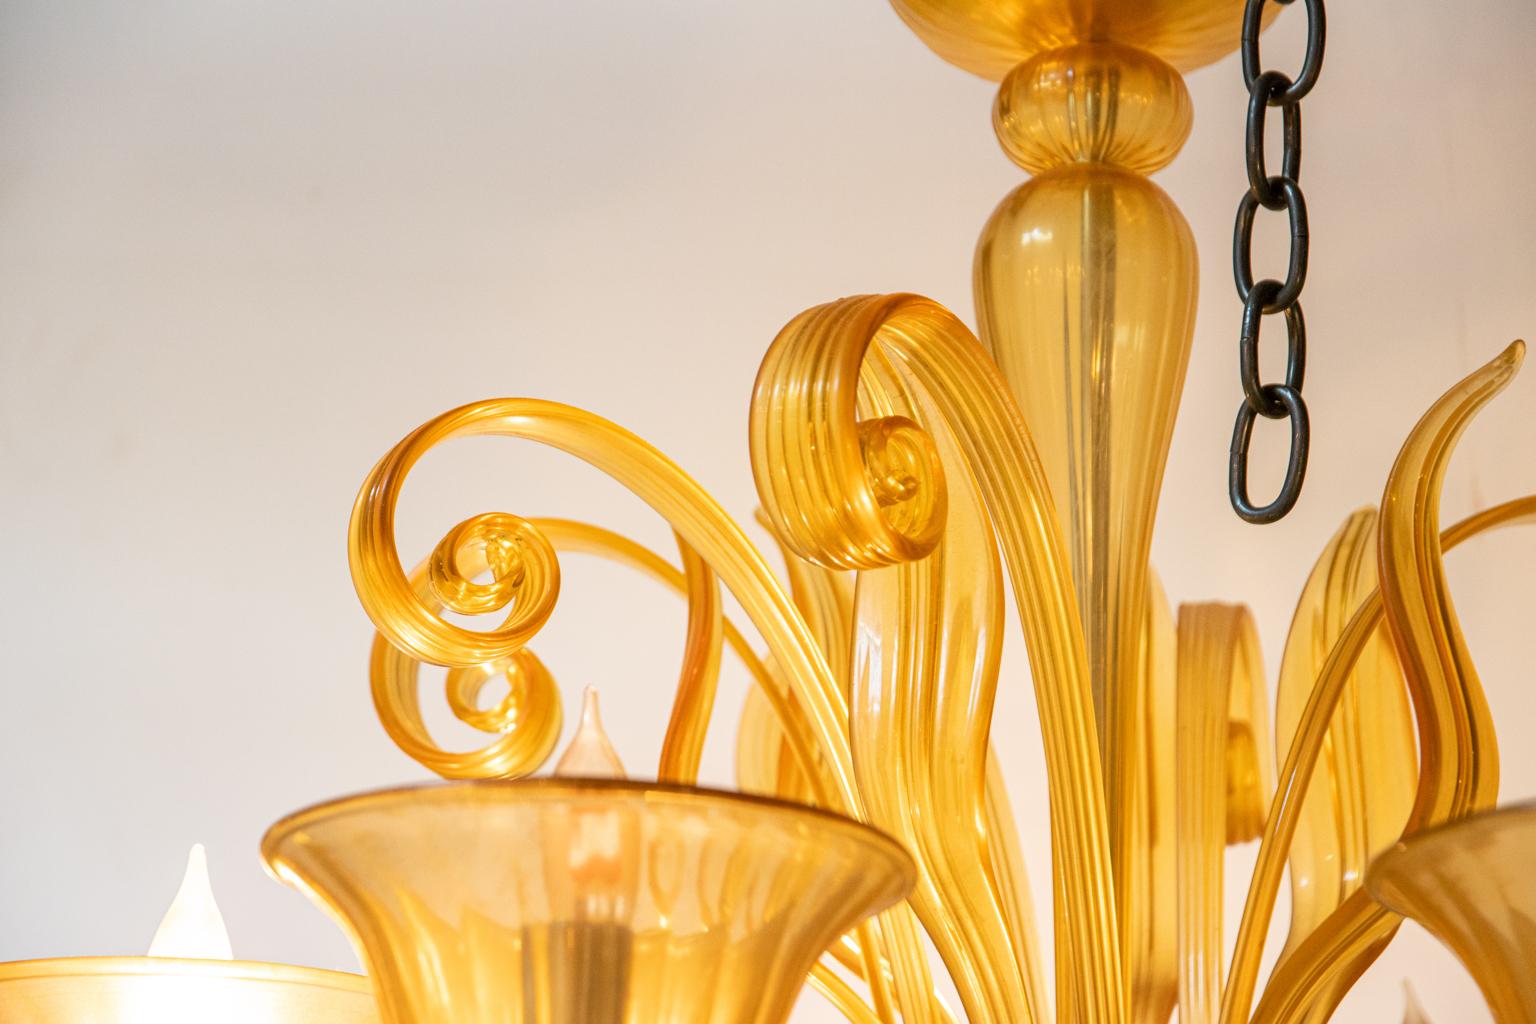 Italian murano glass chandelier in amber toned glass with large cup shaped bobeches. The chandelier is also constructed with scrolled accents and a large pendant bulb shaped finial at the base. Please note of wear consistent with age.